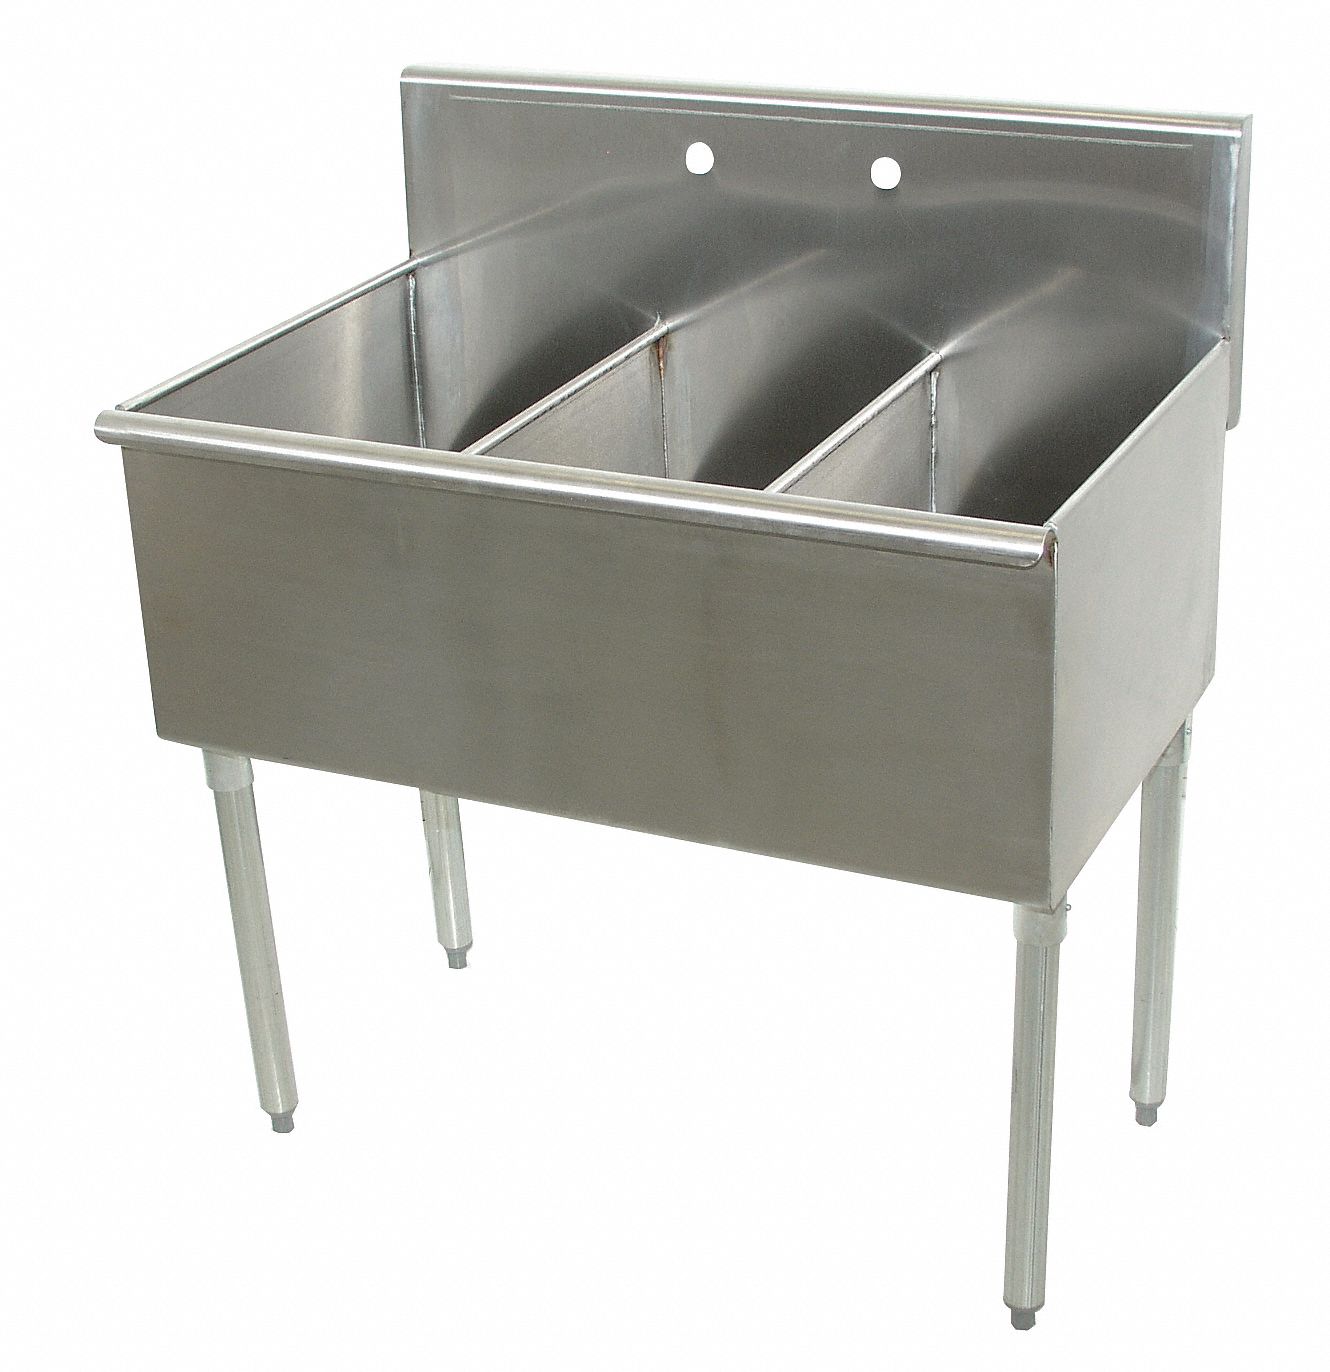 Floor Mount Utility Sink 3 Bowl Stainless 54 L X 24 1 2 W X 41 H